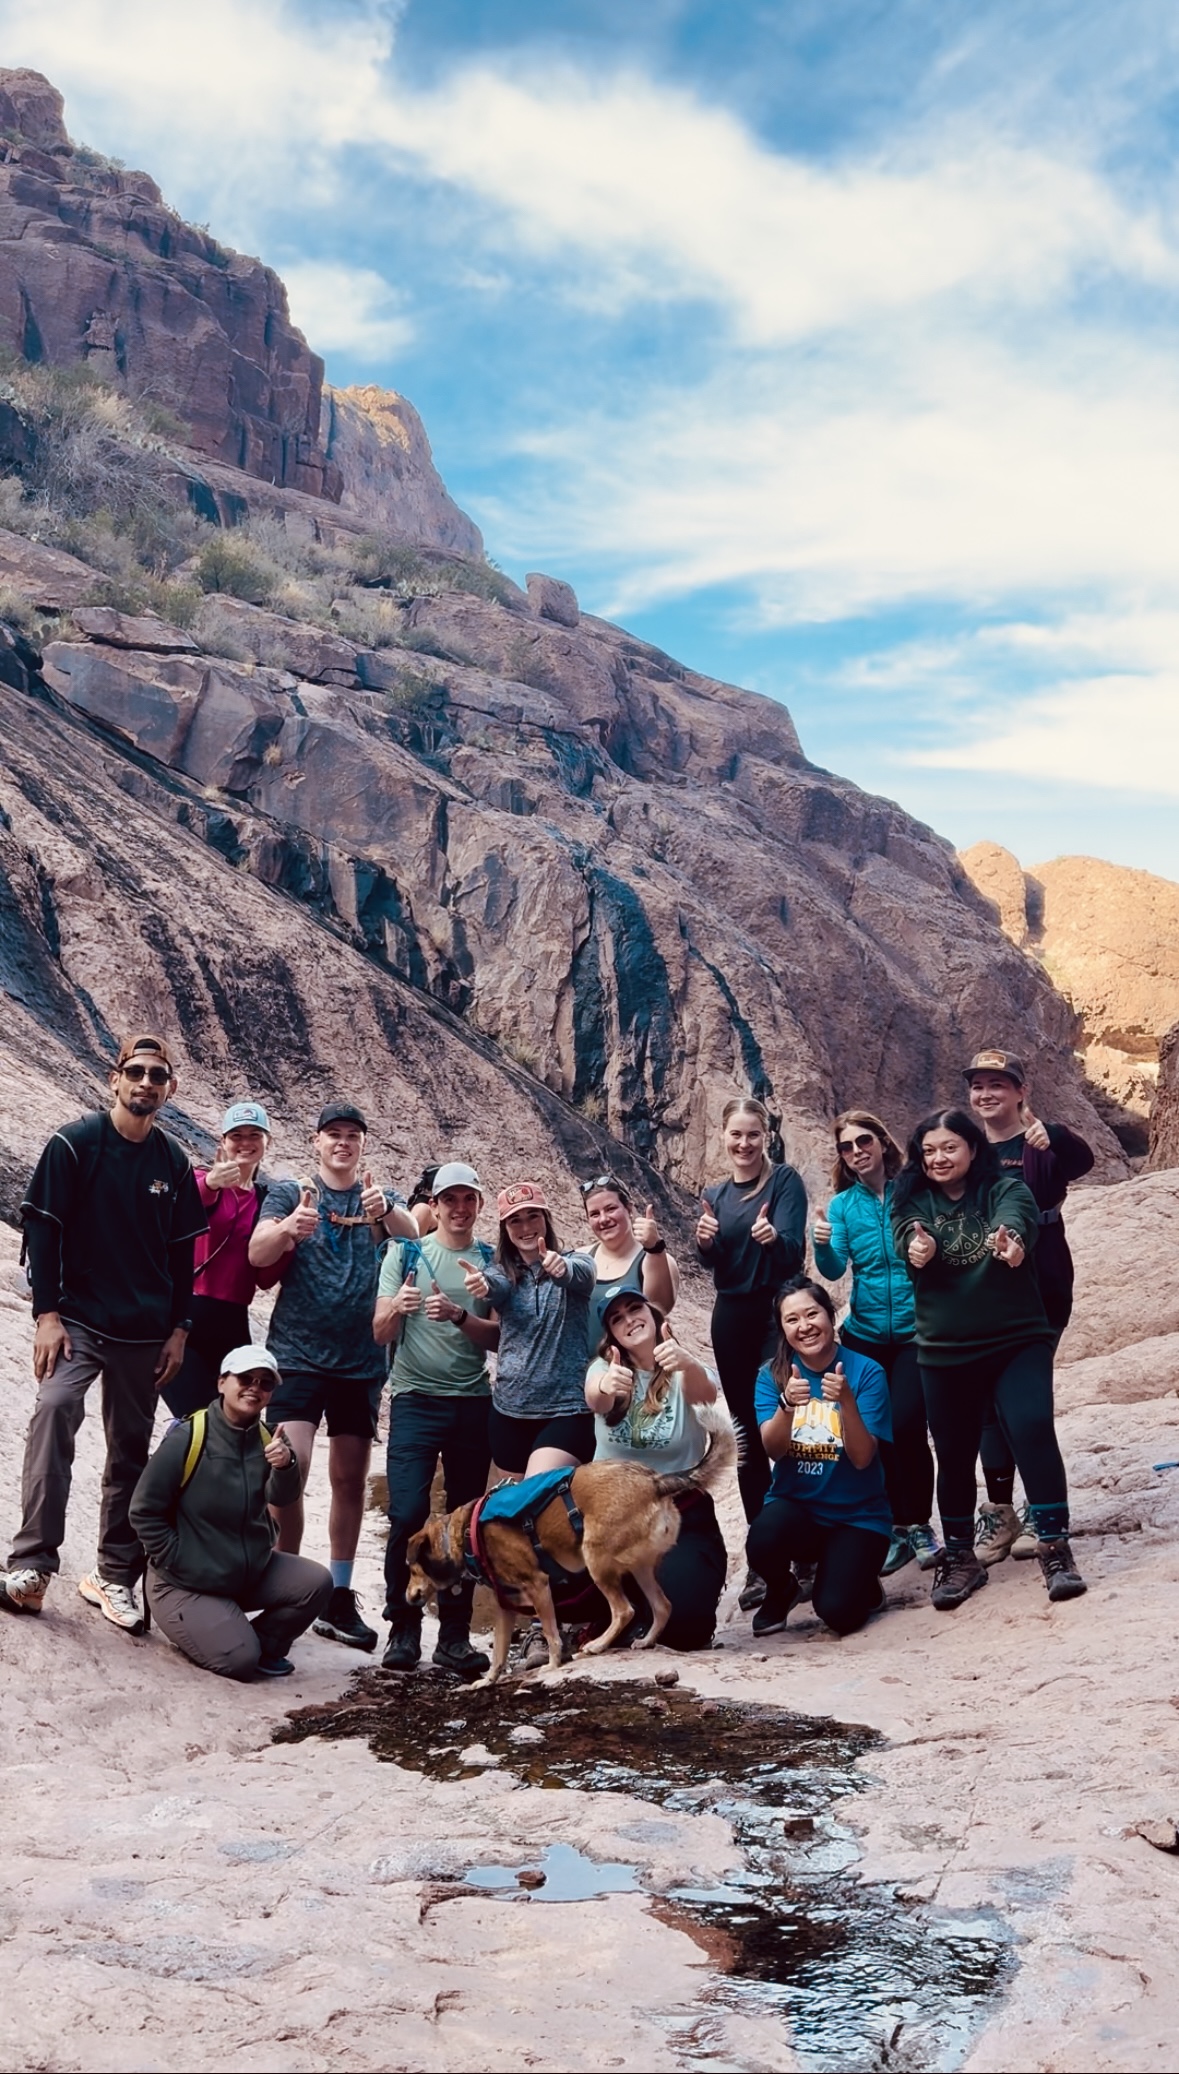 Hiking Groups in Phoenix- The Superstition Mountains 2/17/24